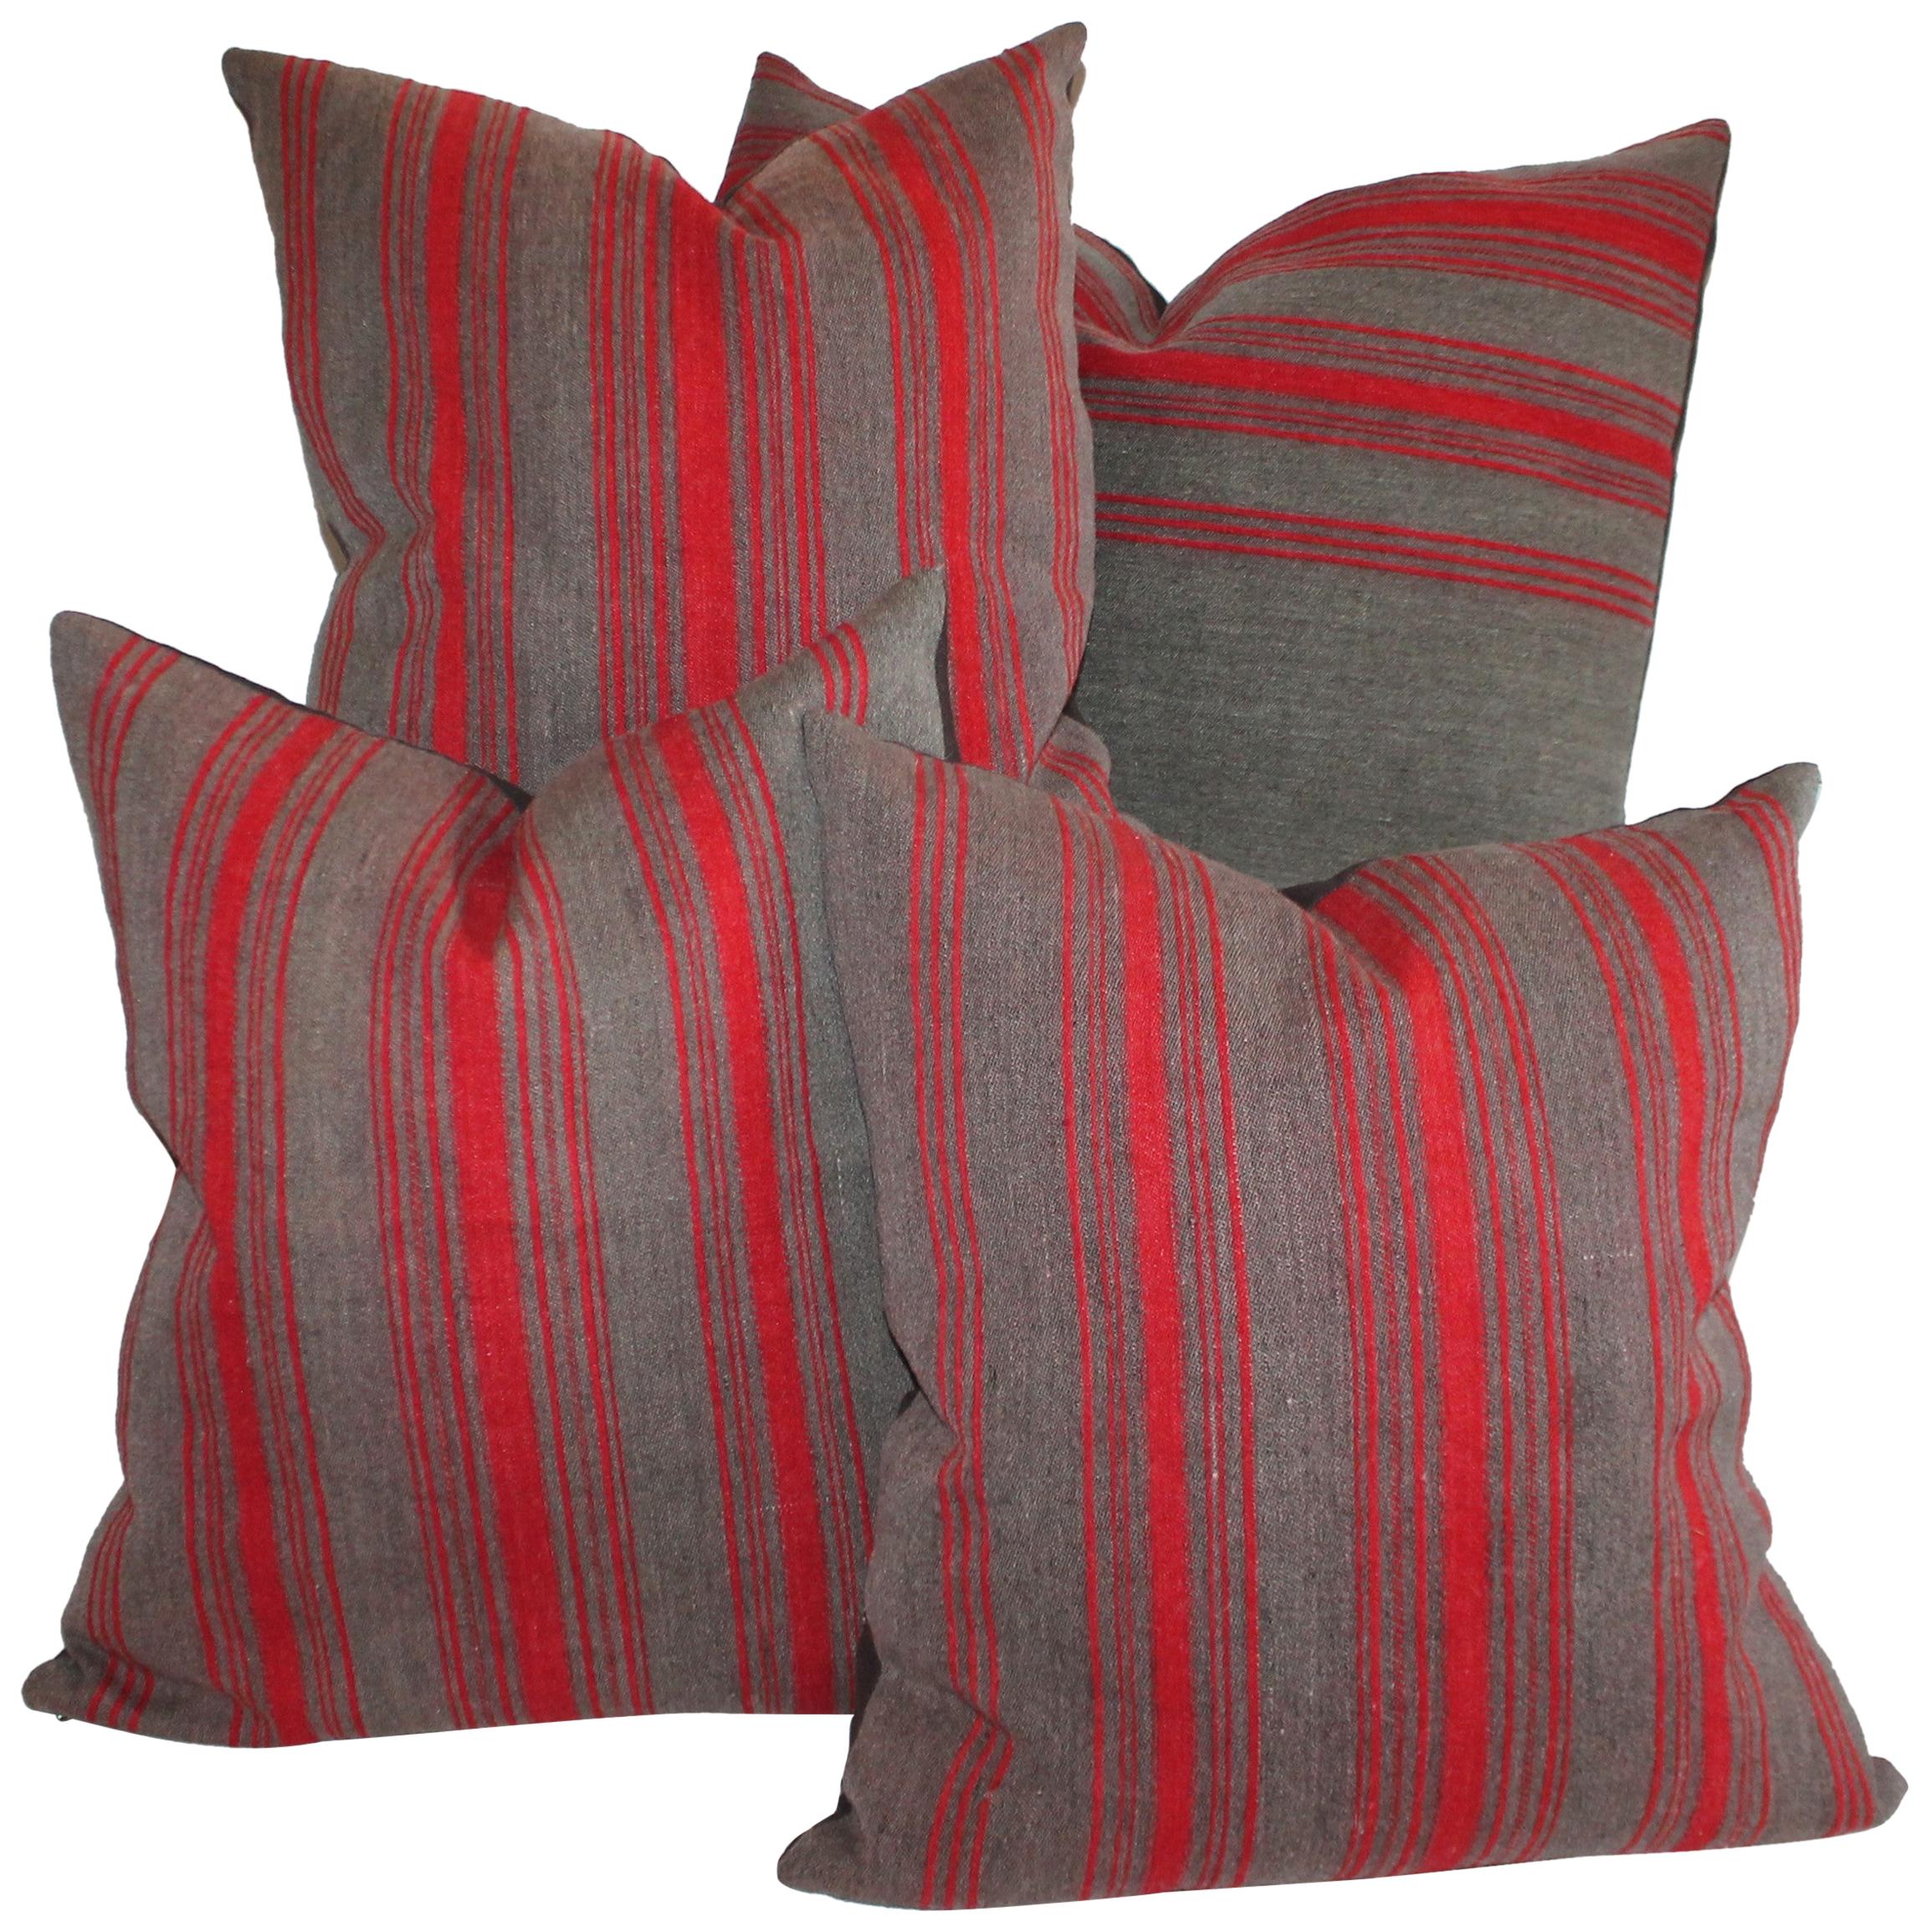  Collection of Red and Grey 19th Century Ticking Pillows